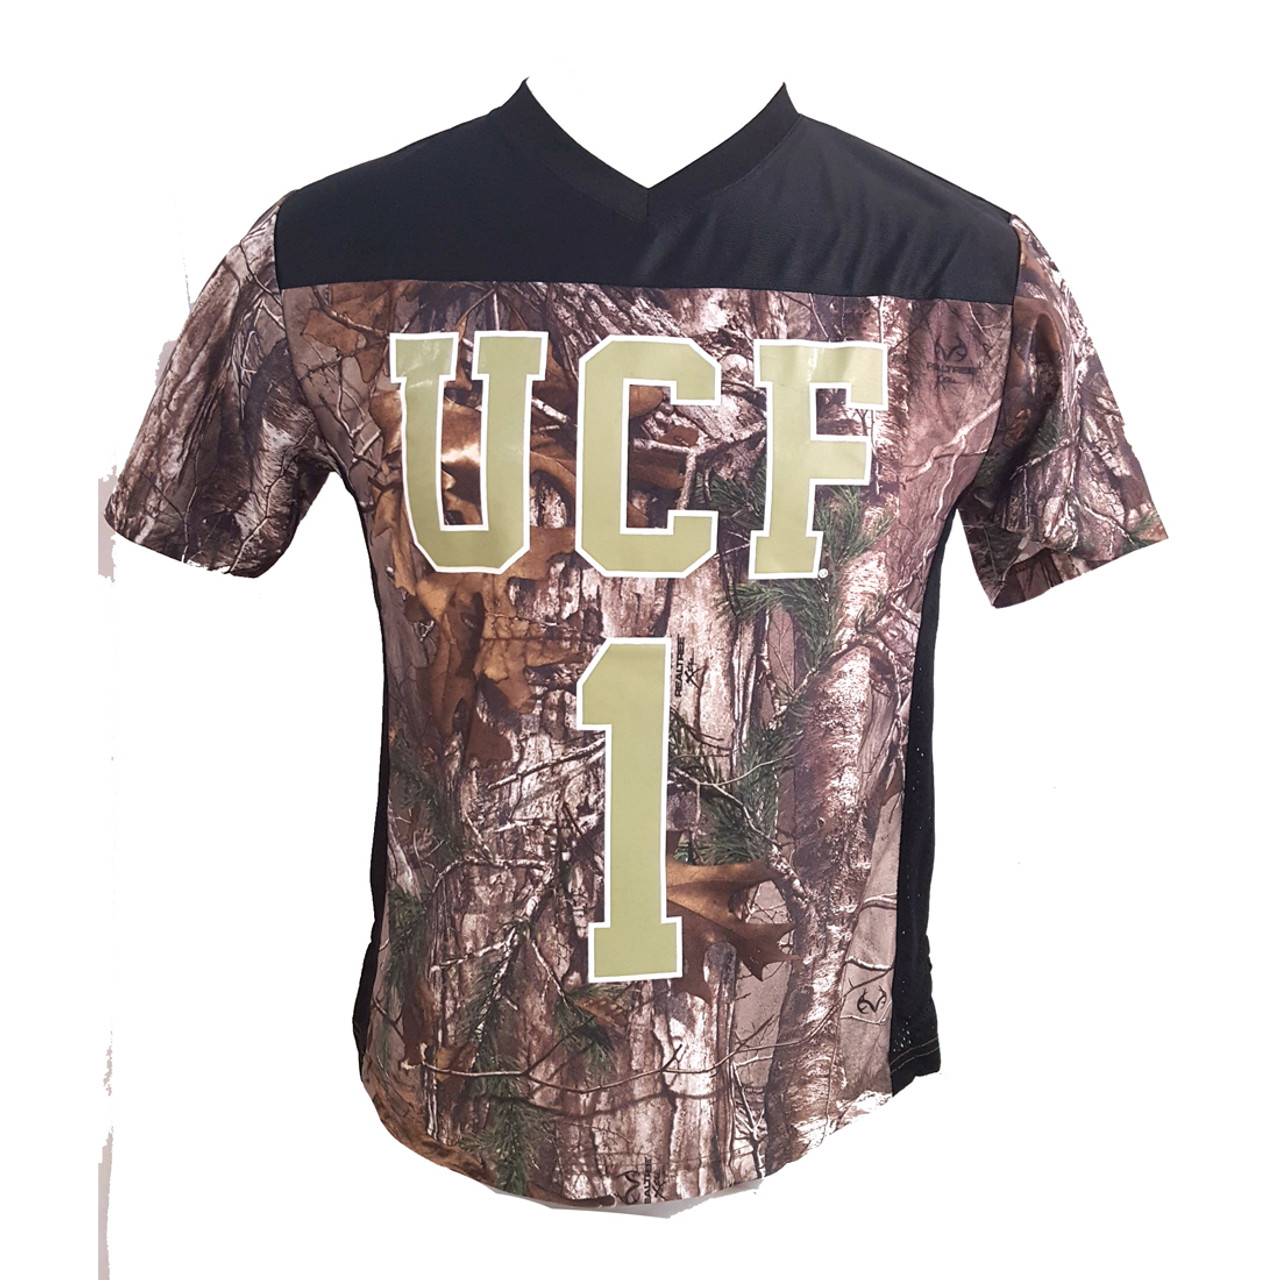 Earthletics Youth Realtree Xtra Camouflage College Football Screen Printed Jersey, Ucf, M, Size: Medium, Gray